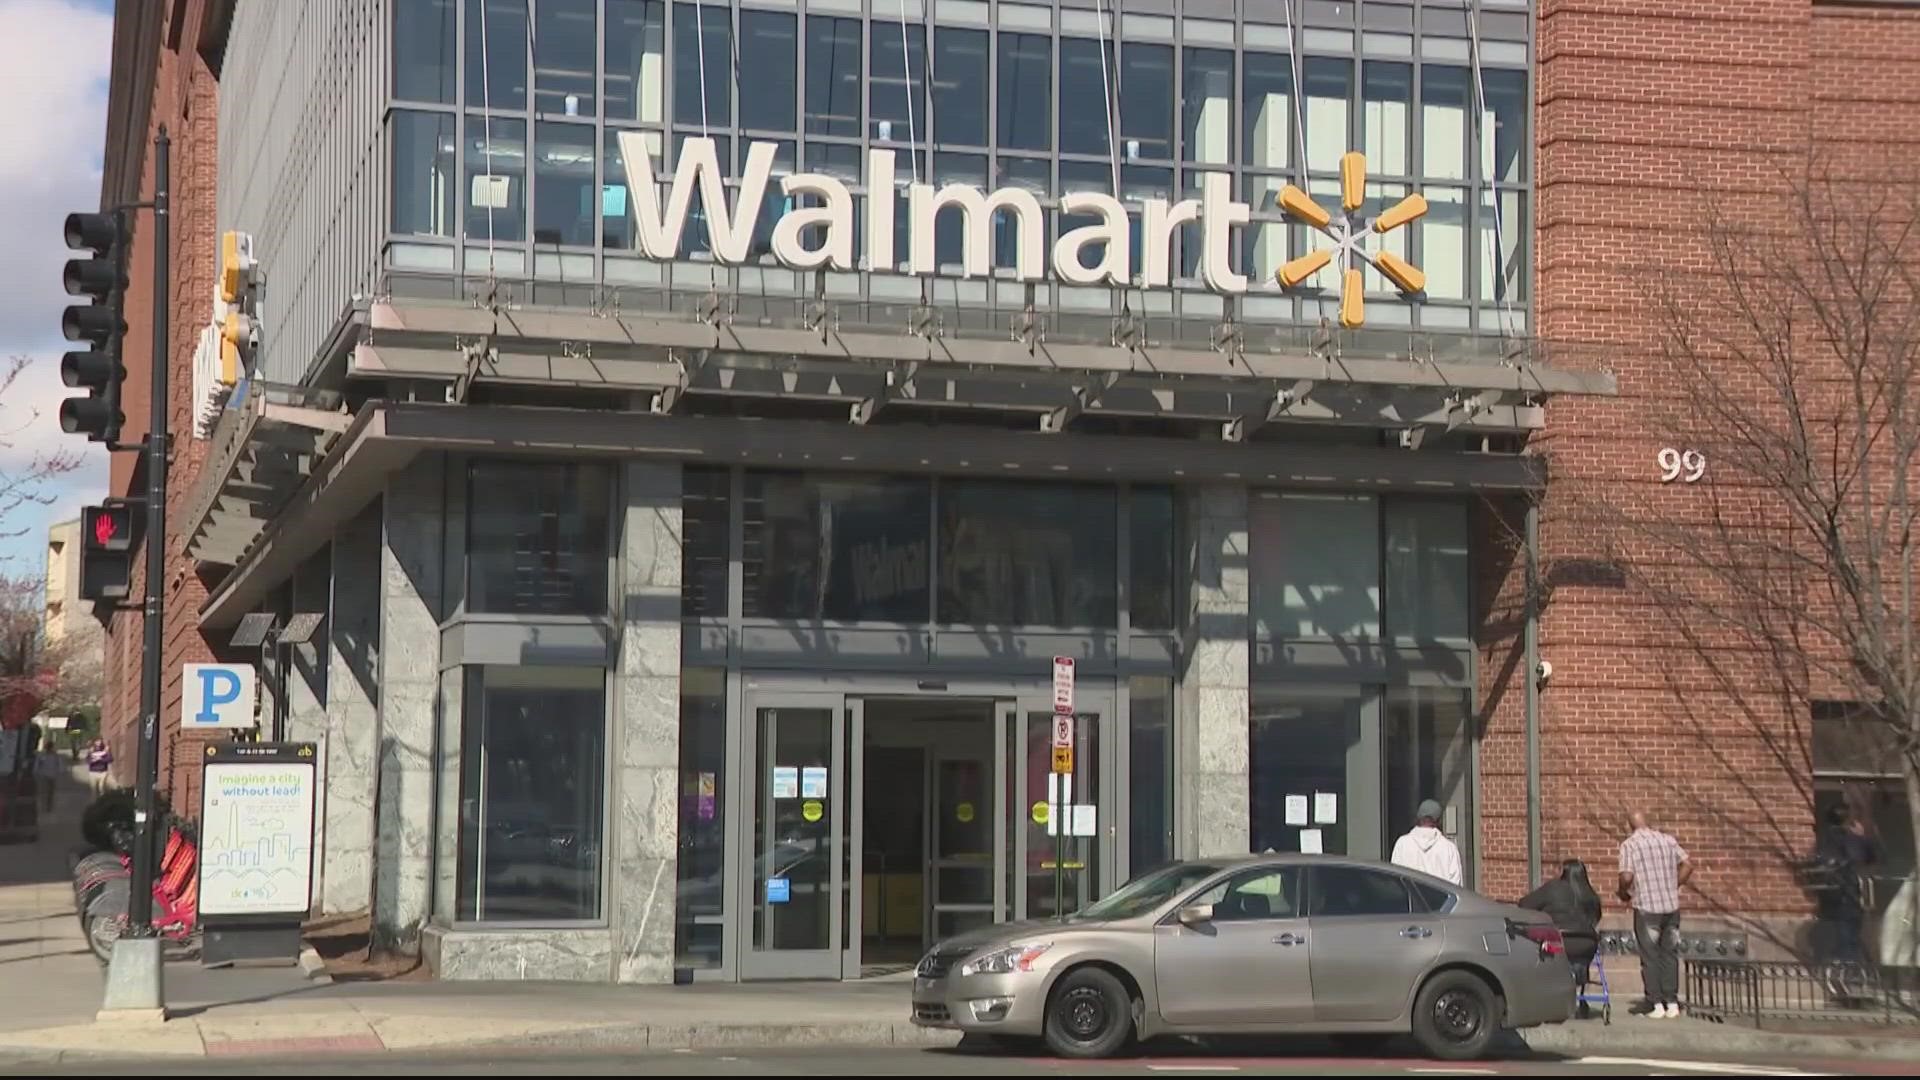 We're digging further into why the Walmart store on 'H Street' is closing... and a timeline of what led up to the controversial decision.